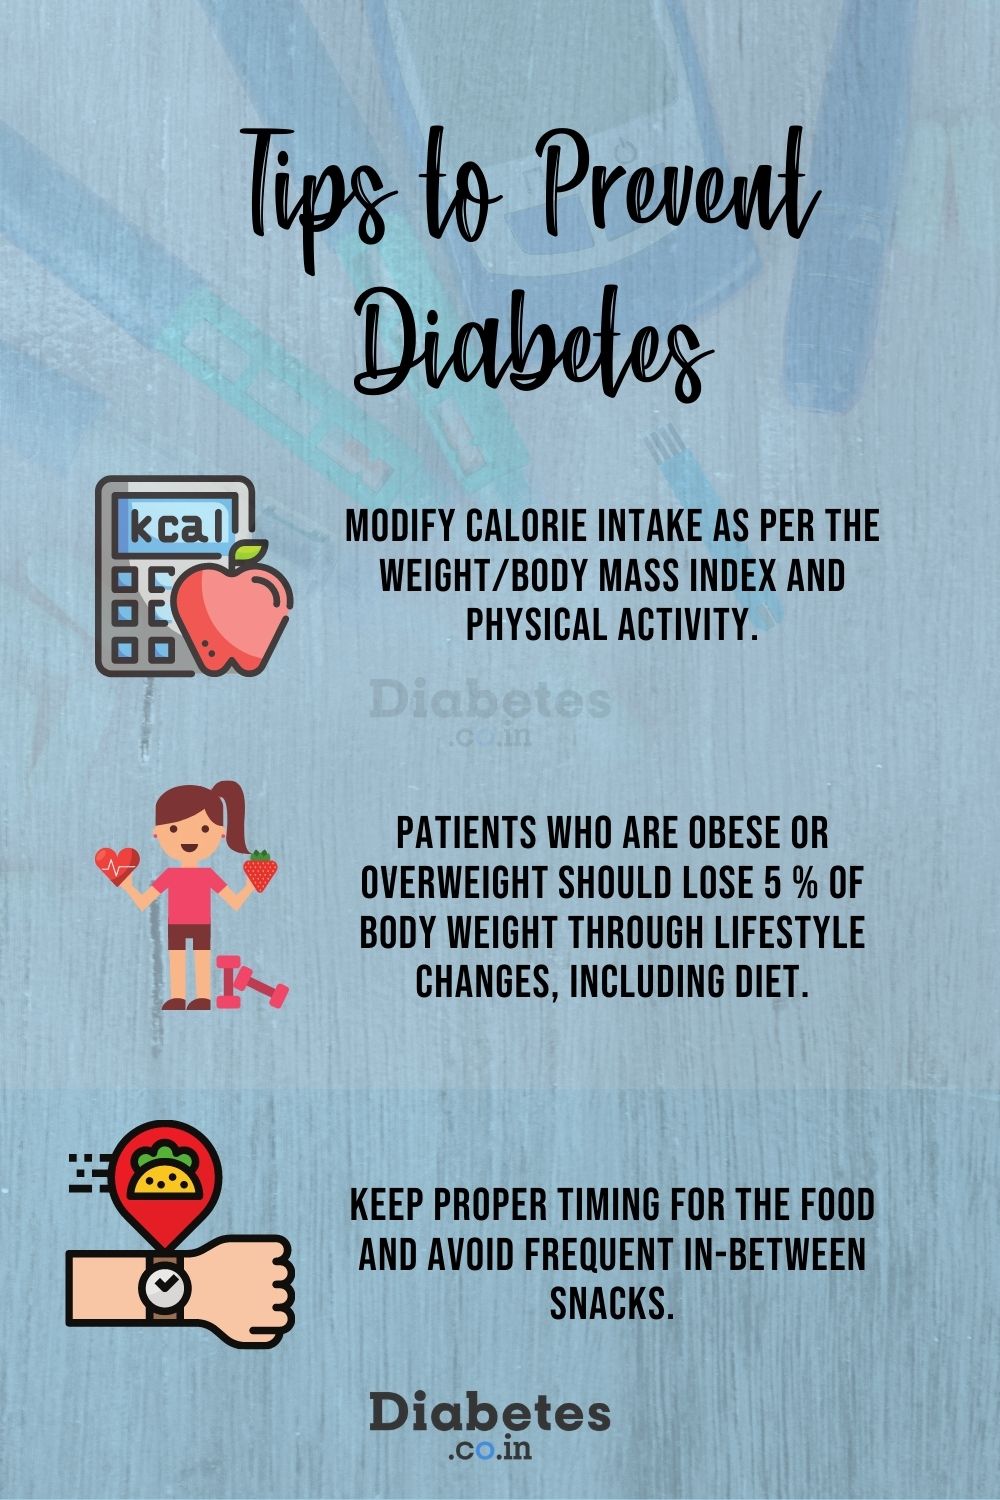 What Are The Best Foods To Eat To Prevent Diabetes